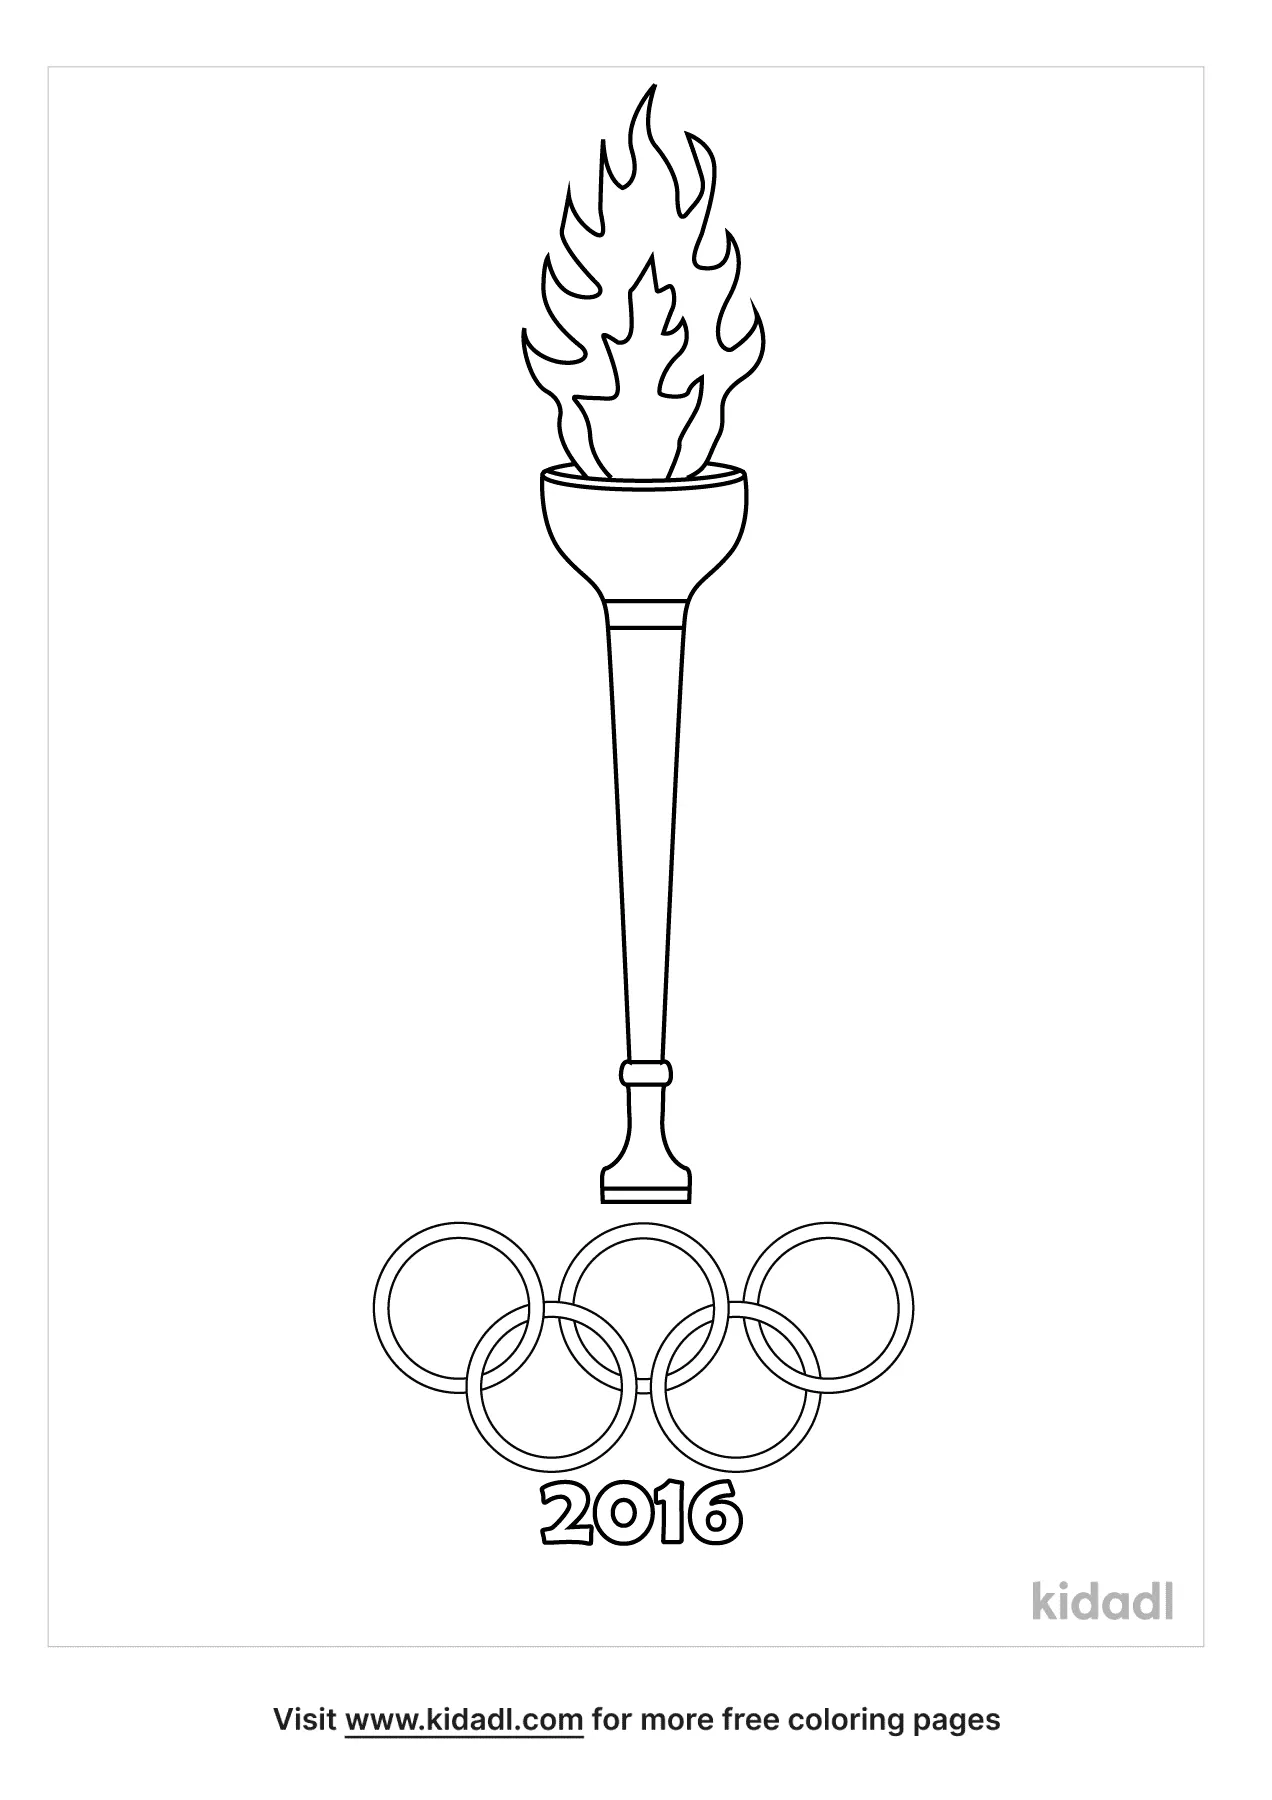 Olympic Torch 2016 Coloring Page